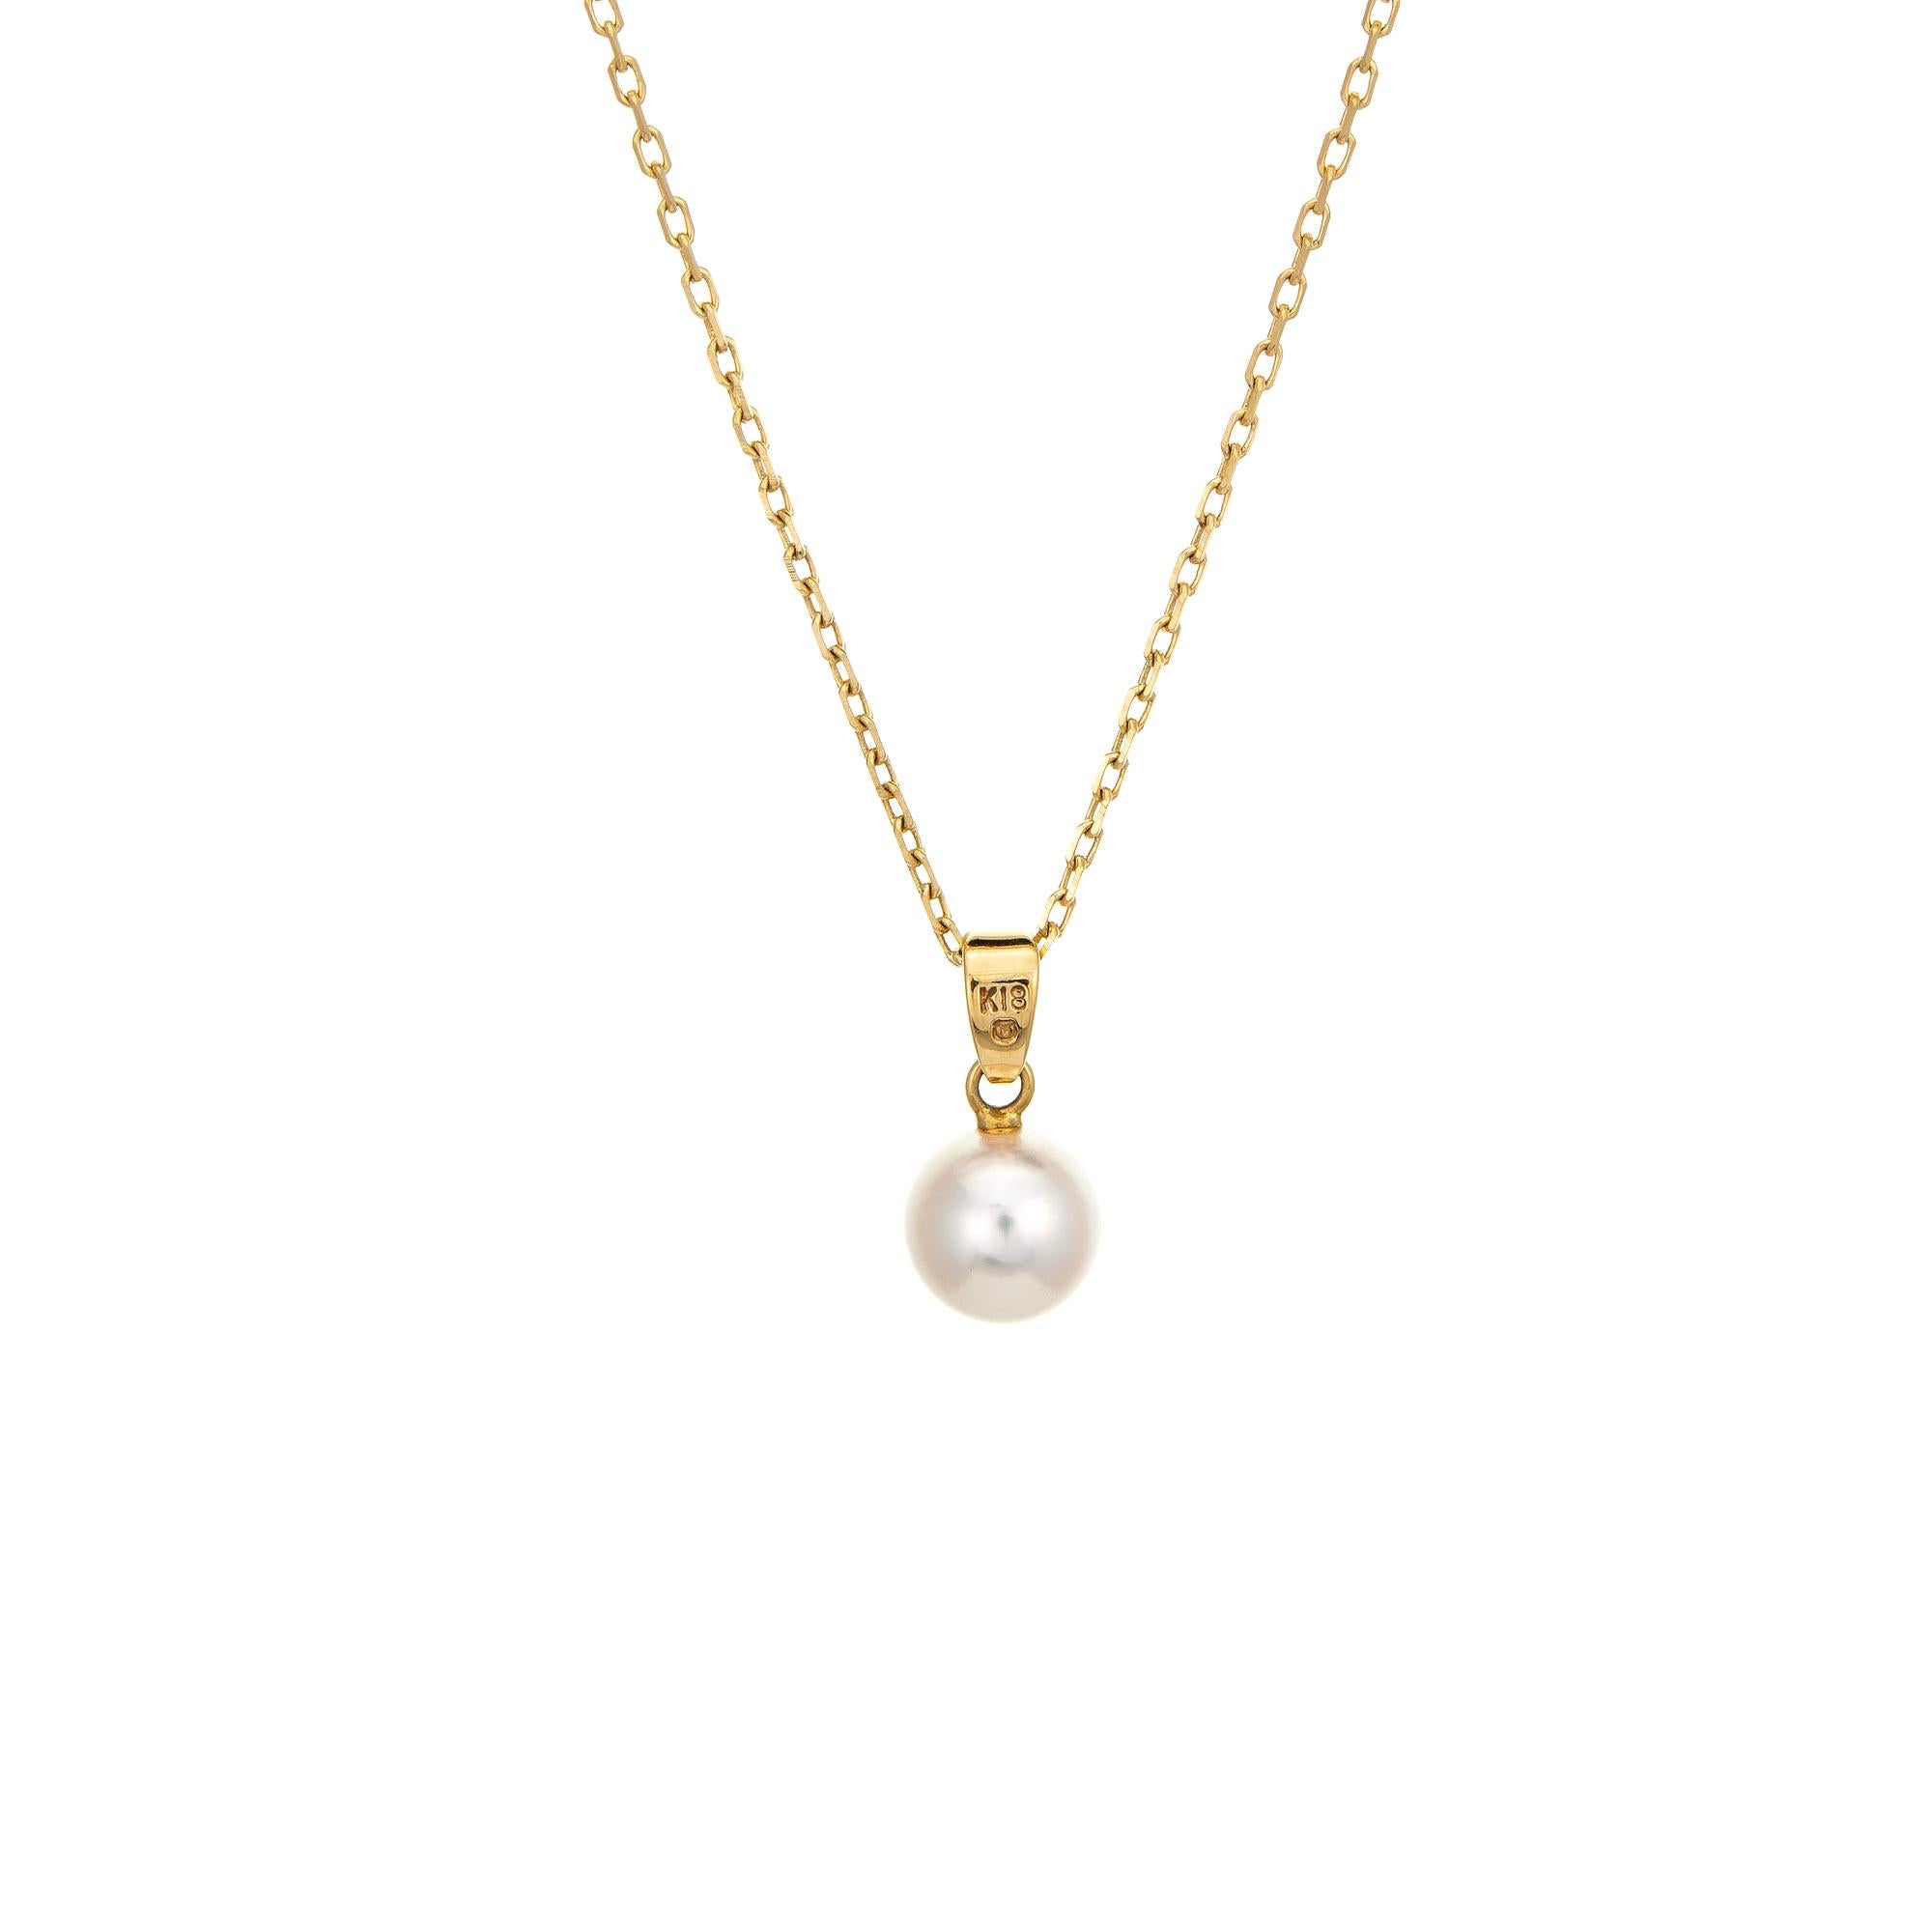 Elegant Mikimoto pendant, finished with a 18k yellow gold chain.  

Mikimoto cultured akoya round pearl measures 7mm. The pearls is lustrous and shows rose overtones. 

The necklace measures 16 inches in length and can be worn alone or layered with